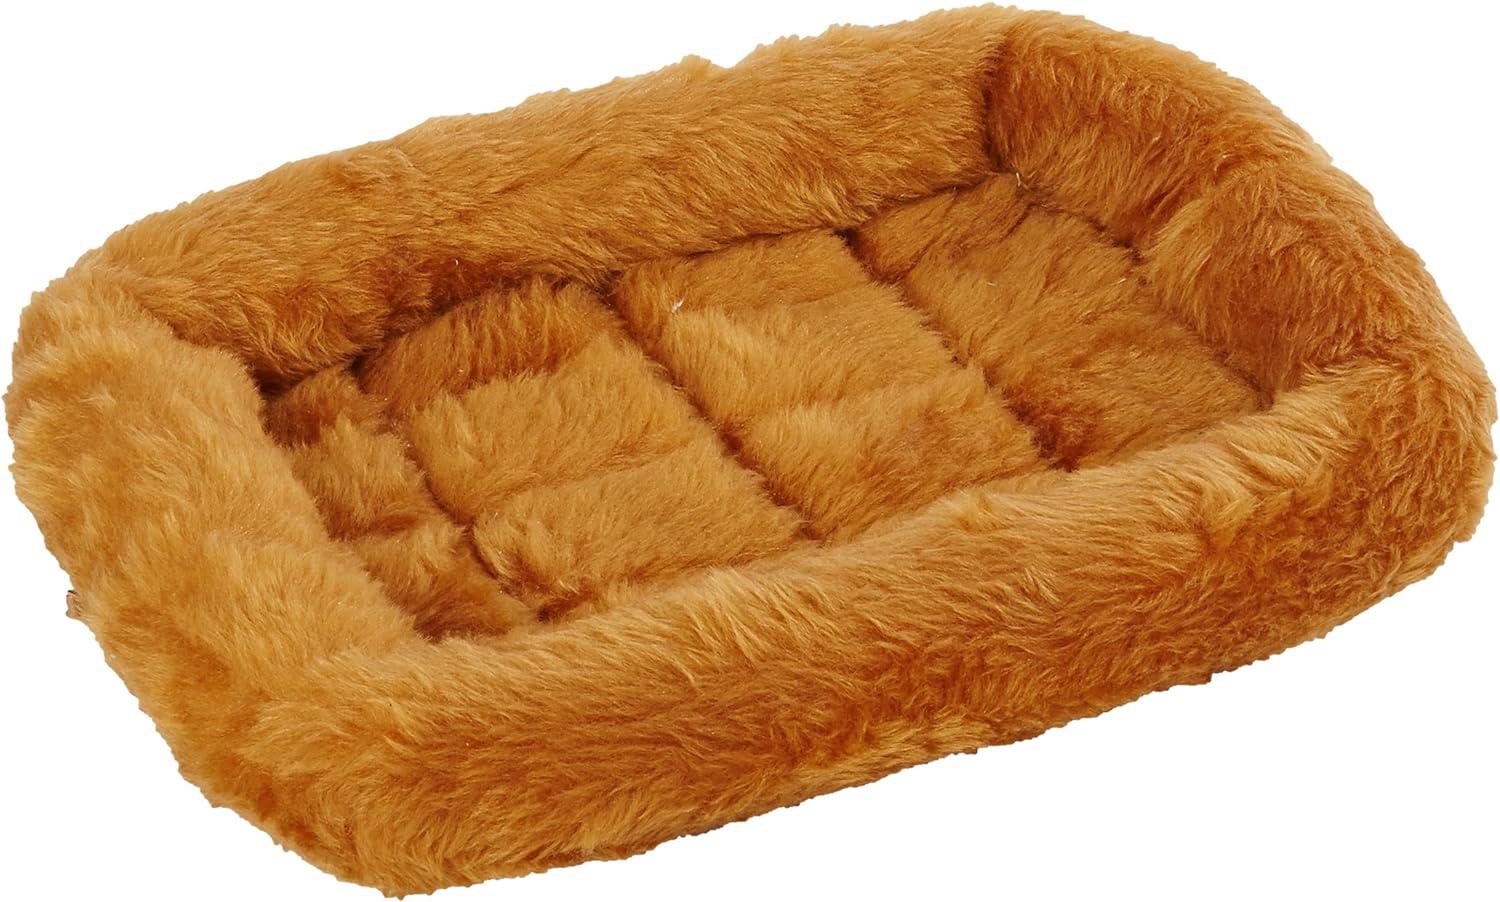 MidWest Homes for Pets Cinnamon 18-Inch Pet Bed for $4.99